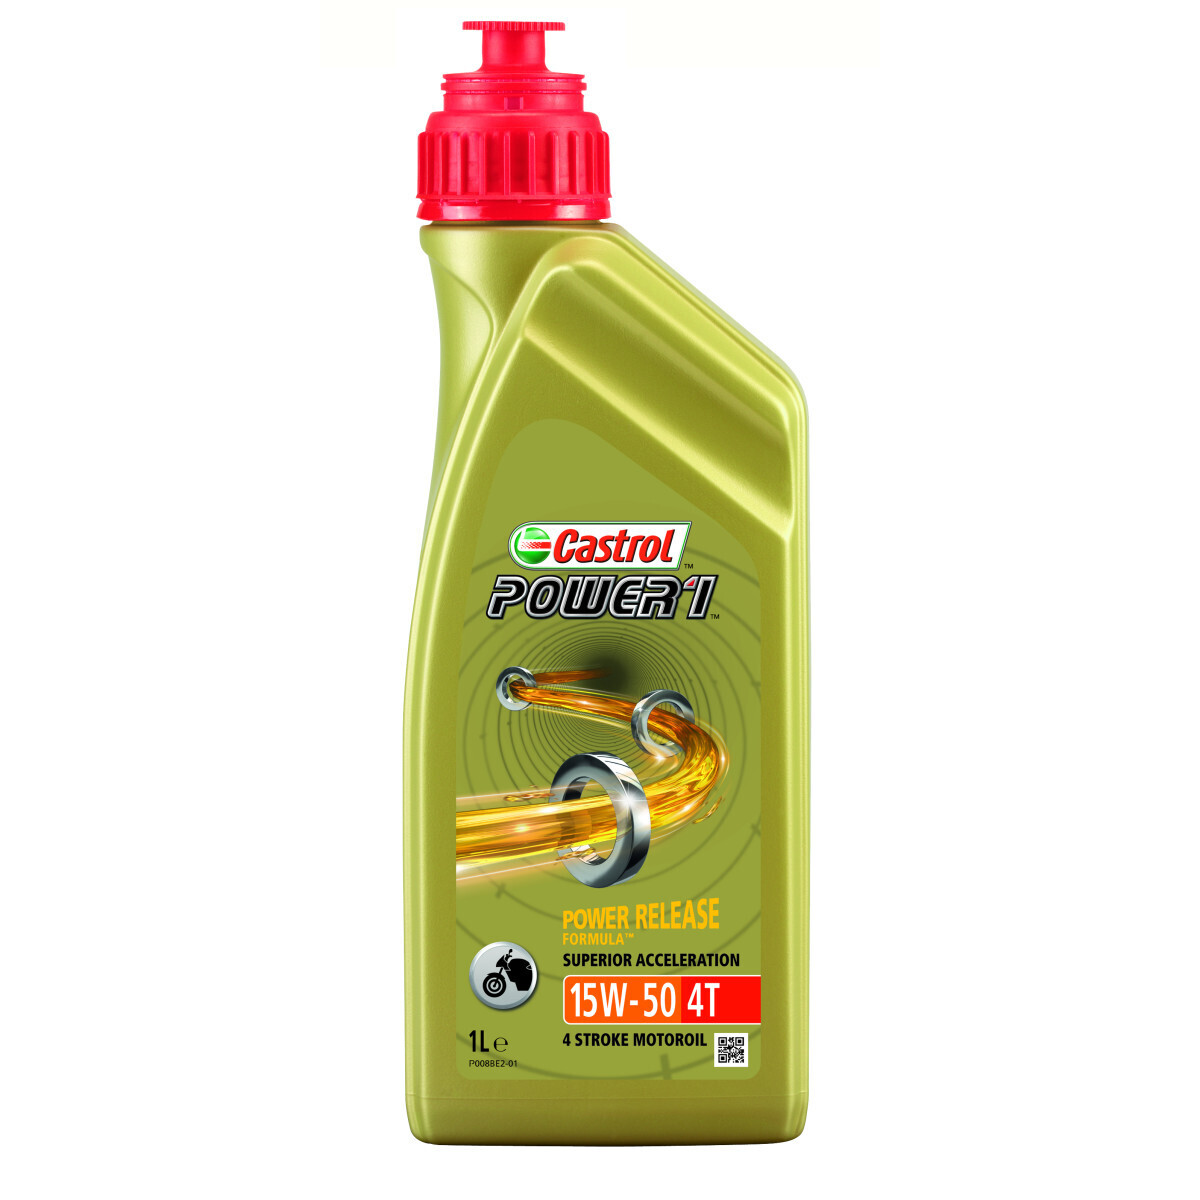 CASTROL
POWER 1 4-STROKE SAE 15W50 PARTLY SYNTHETIC 1 LITER